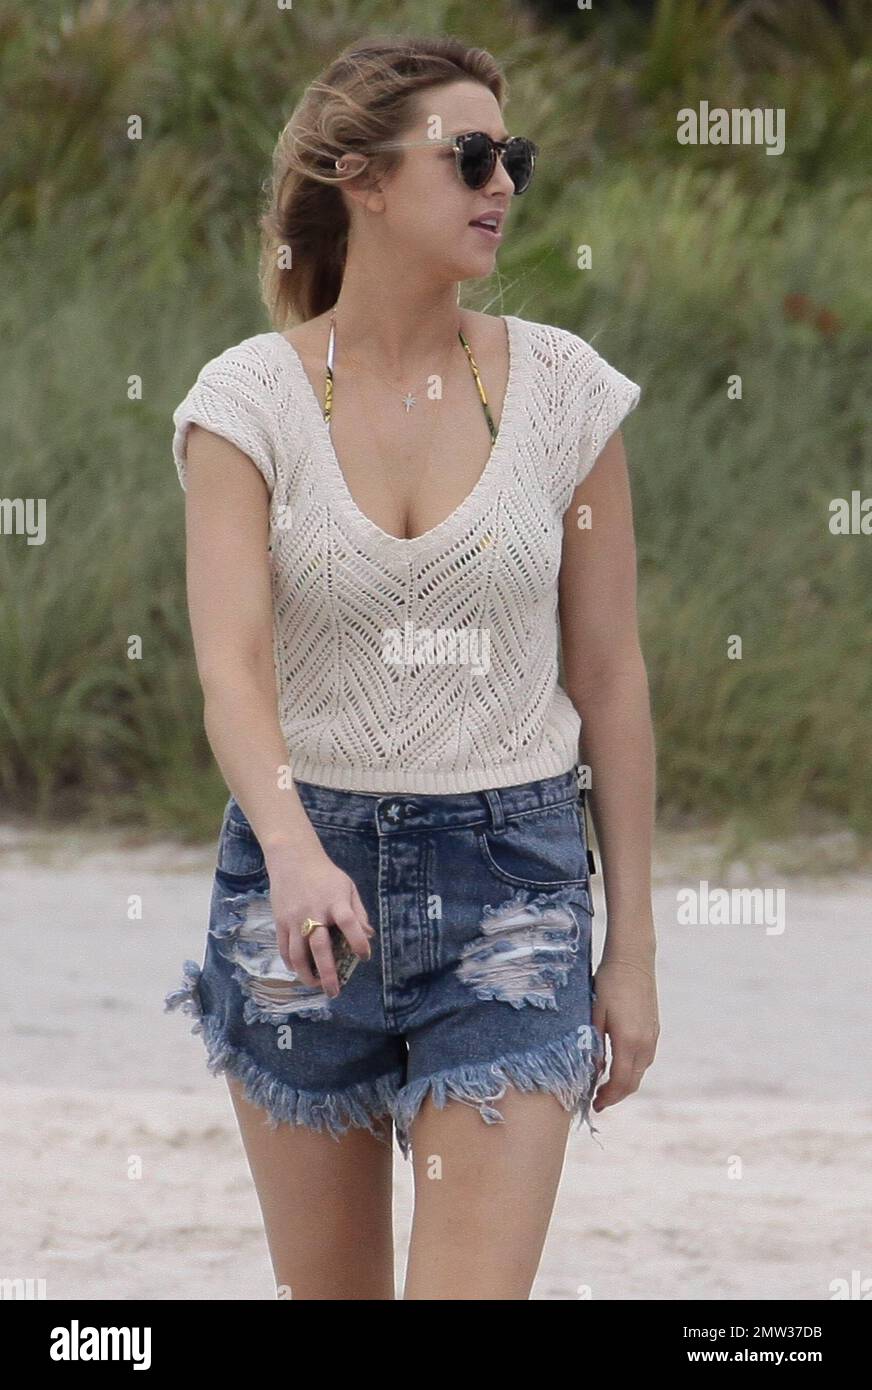 Whitney Port was spotted arriving at South Beach in a tan crochet top and  cut-off jean shorts. The 27 year old reality star was meeting up with  friends to spend the afternoon